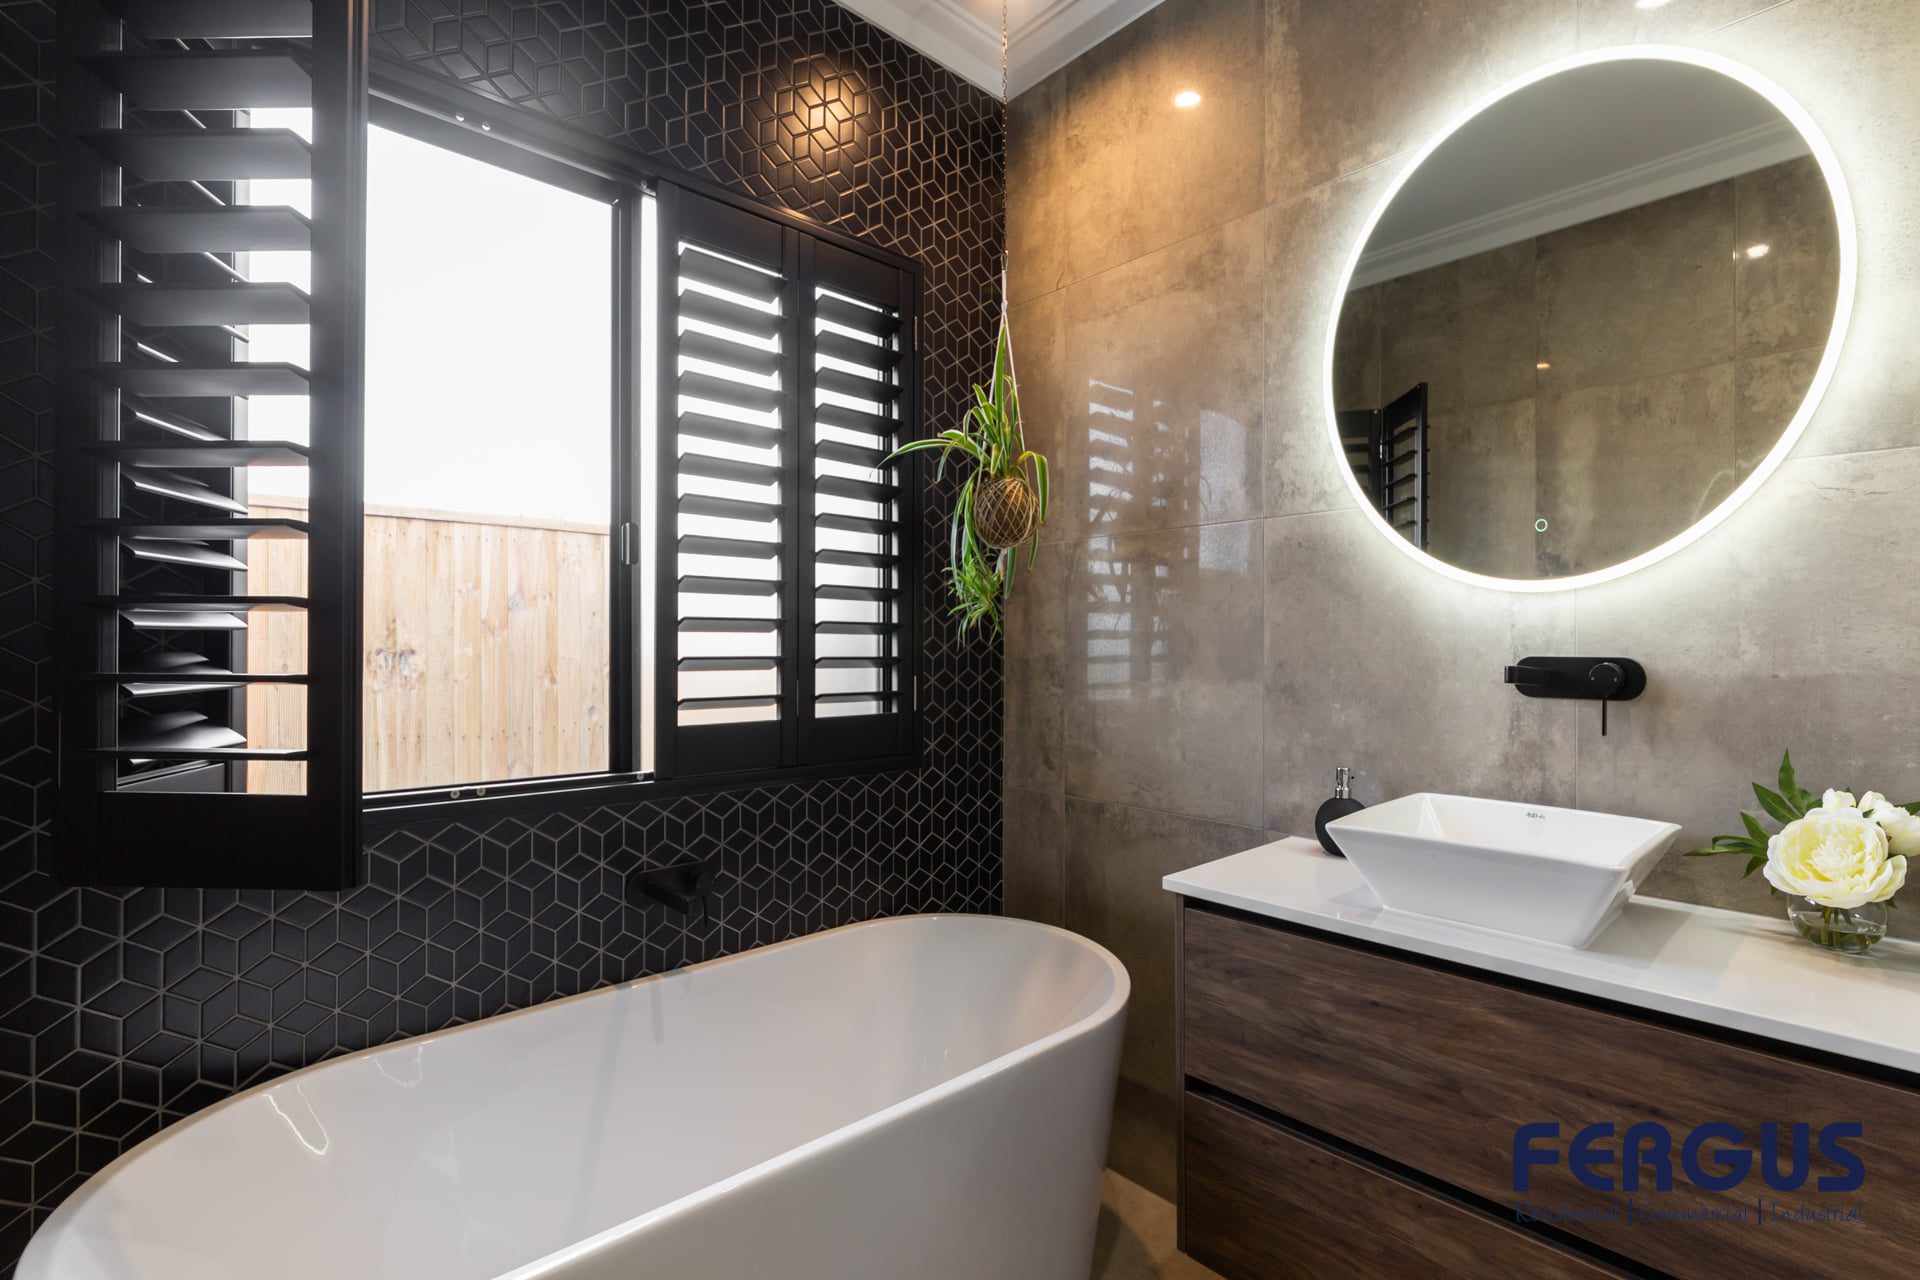 Ella 452 Residential Bathroom Design featuring a meticulously crafted vanity cabinet with sink & mirror & bathtub by Fergus Builders Residential, Industrial & Commercial real estate development Mackay